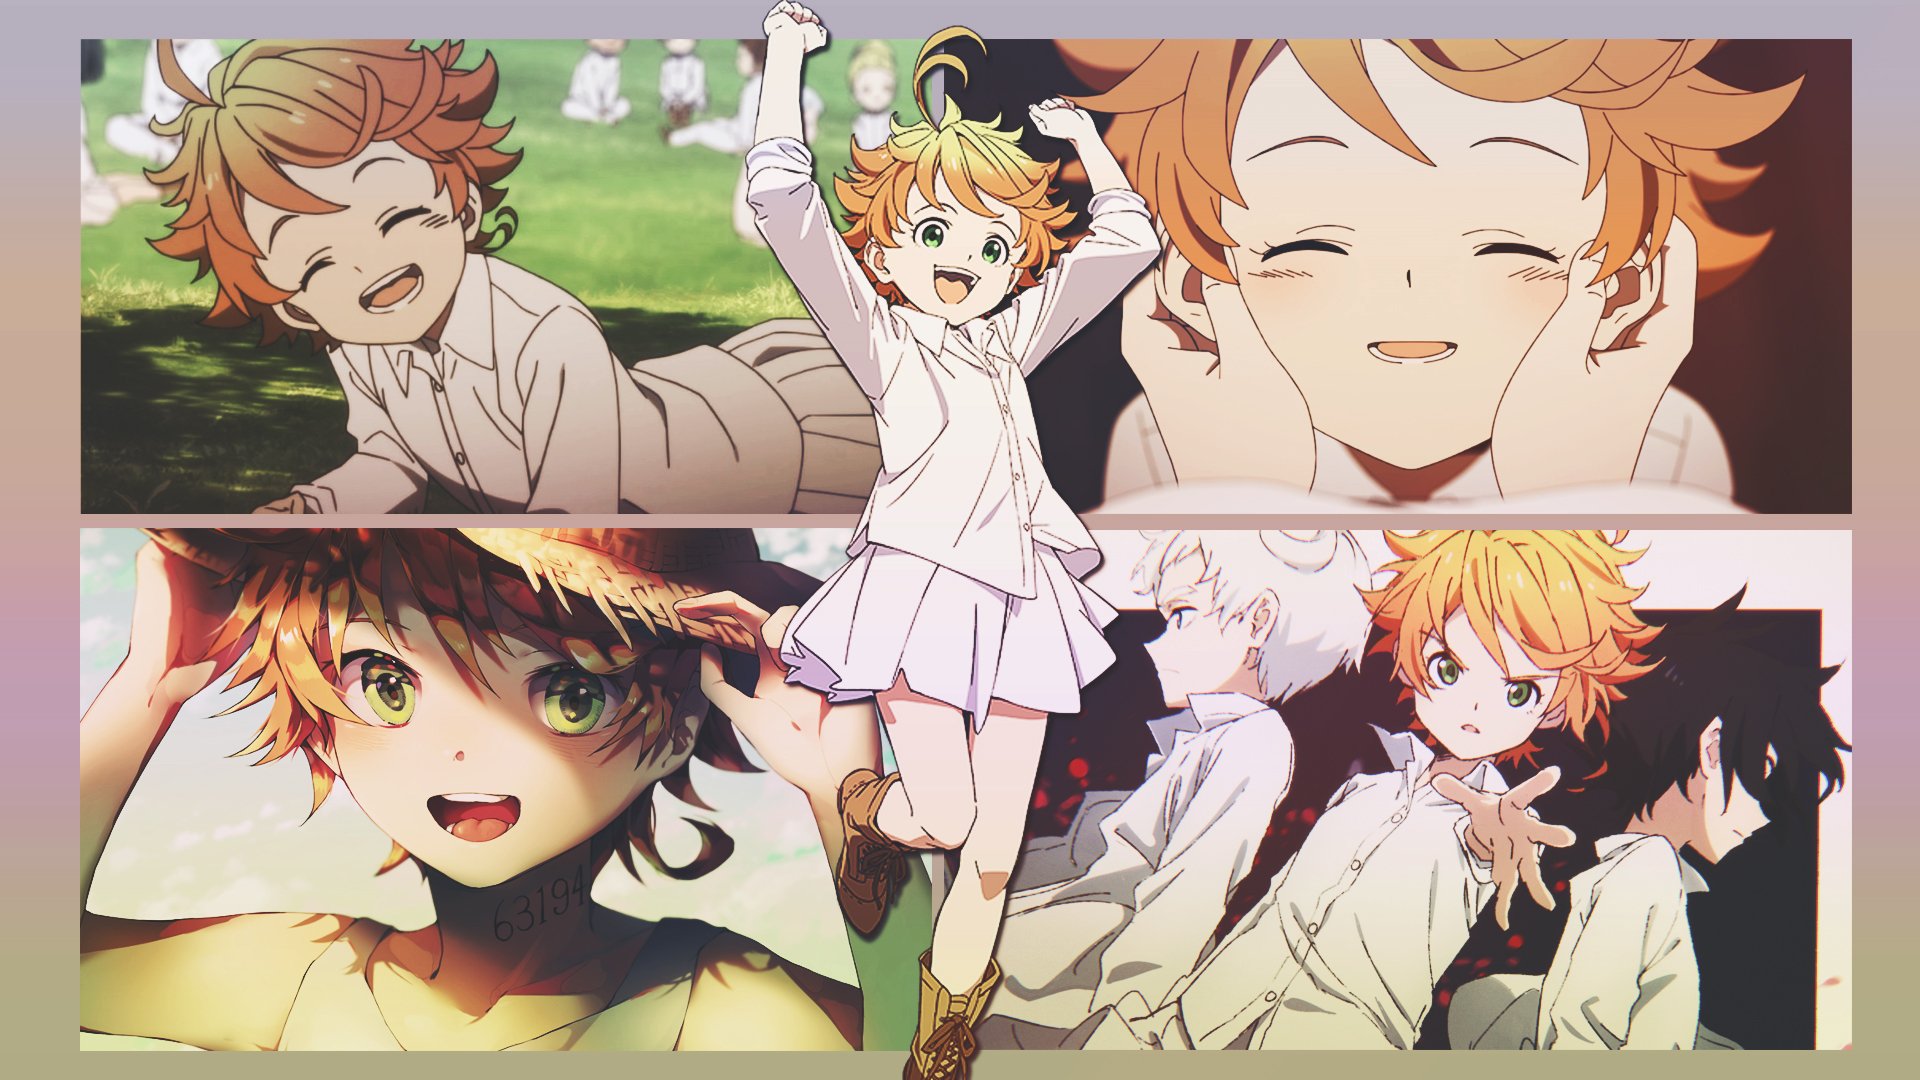 Download Gilda from The Promised Neverland Anime Series Wallpaper